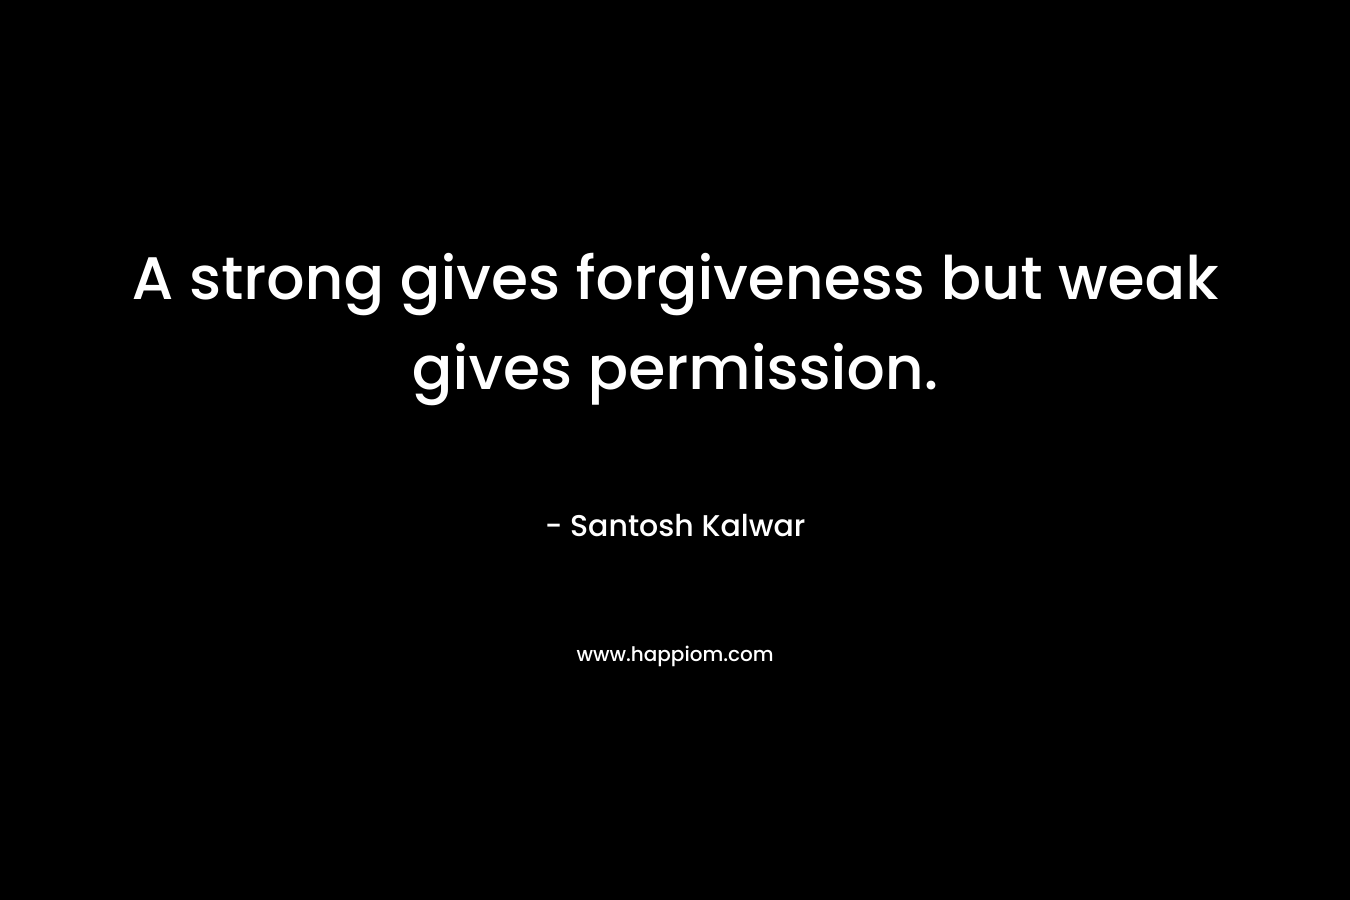 A strong gives forgiveness but weak gives permission.